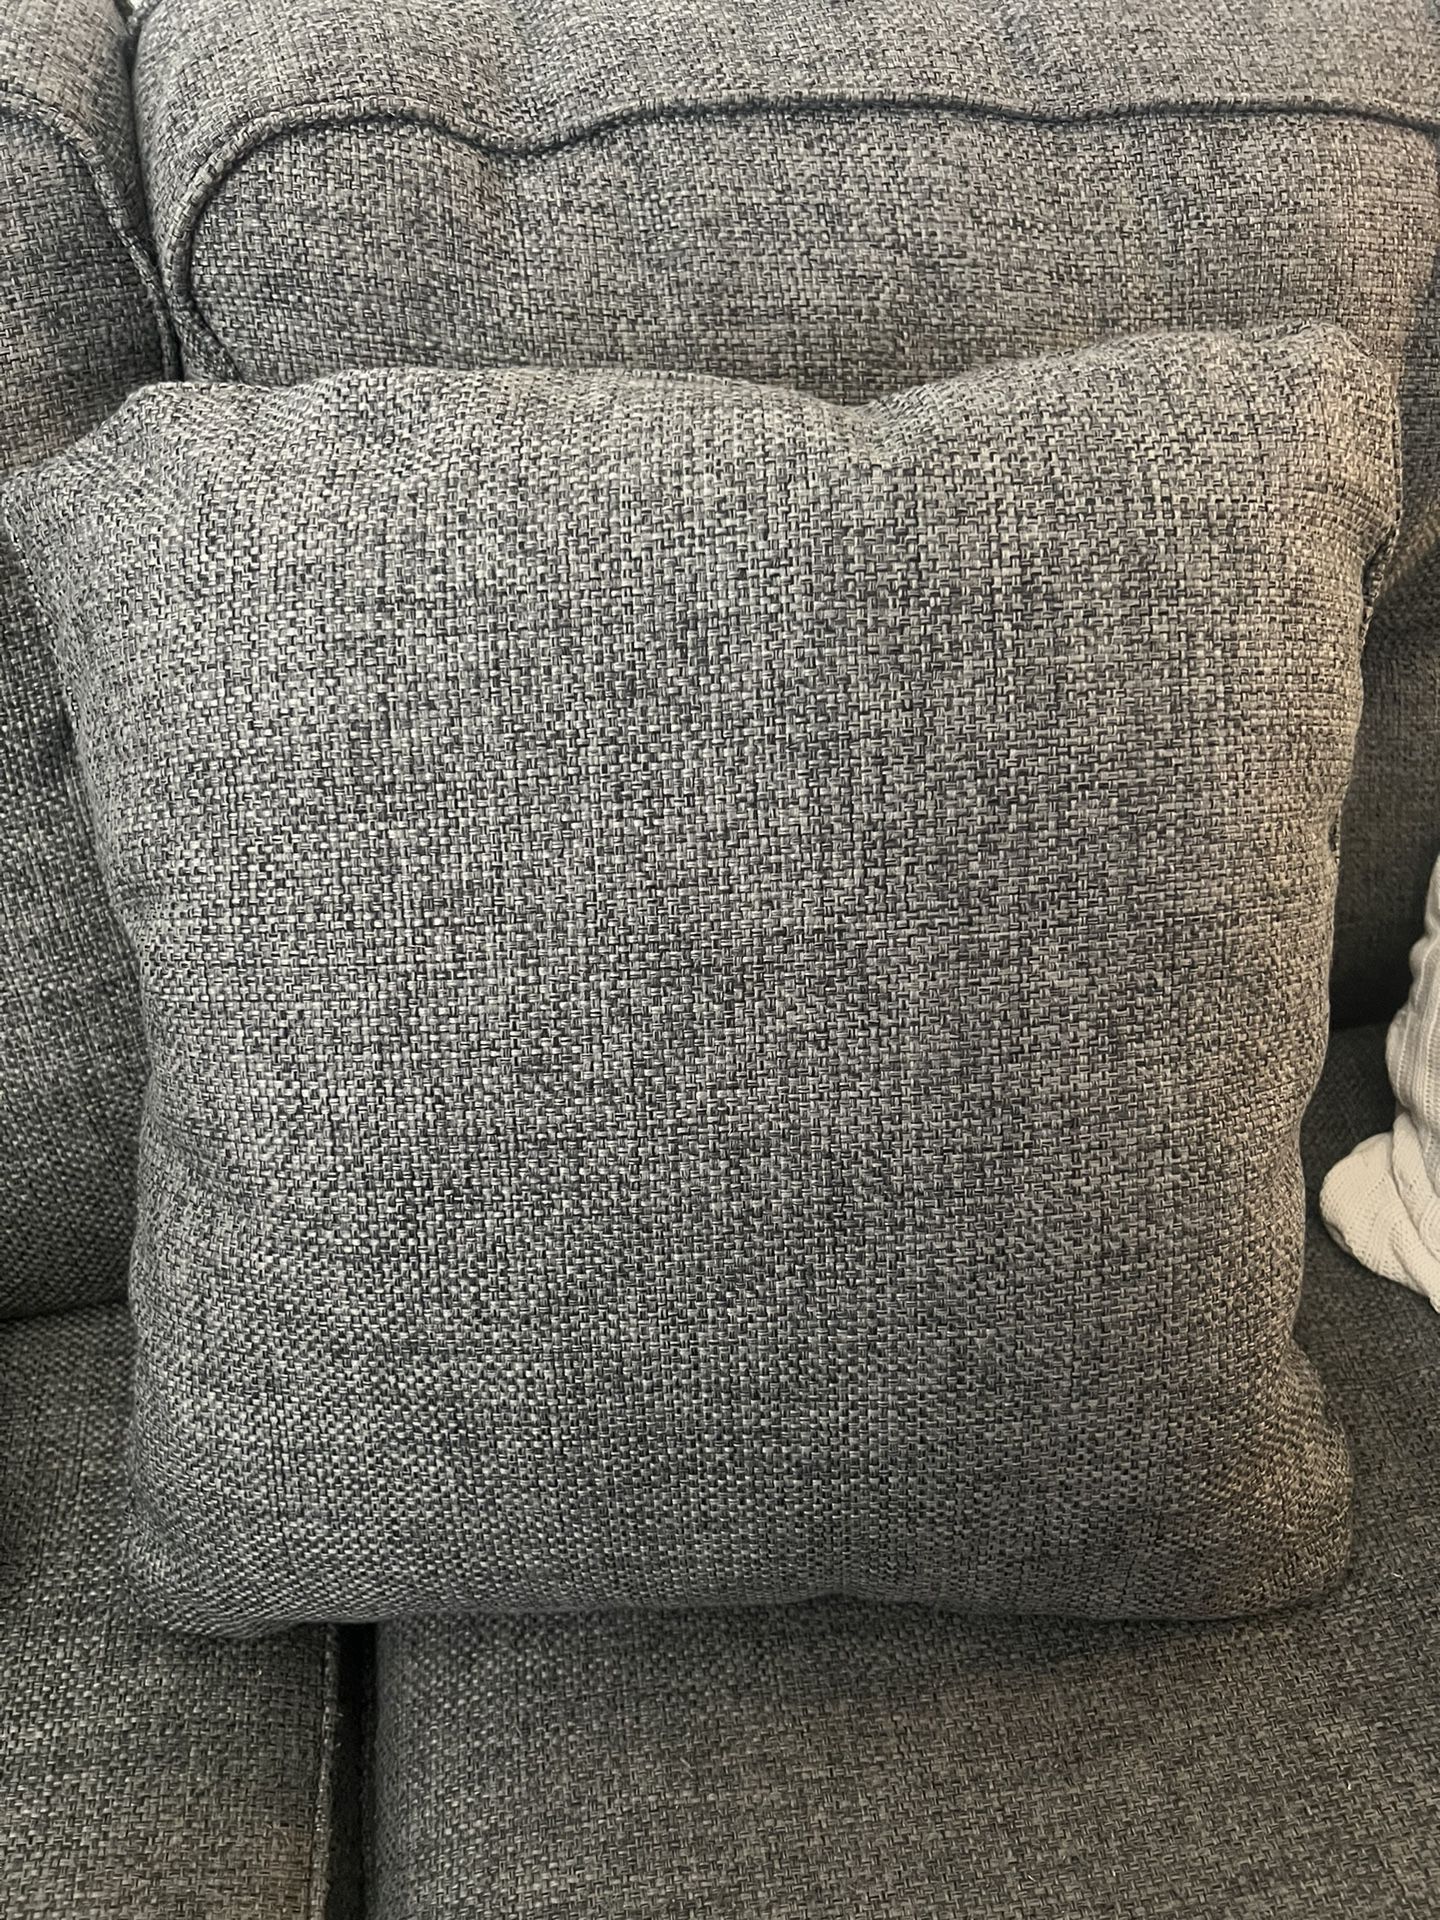 4 Large Square Couch Pillows 